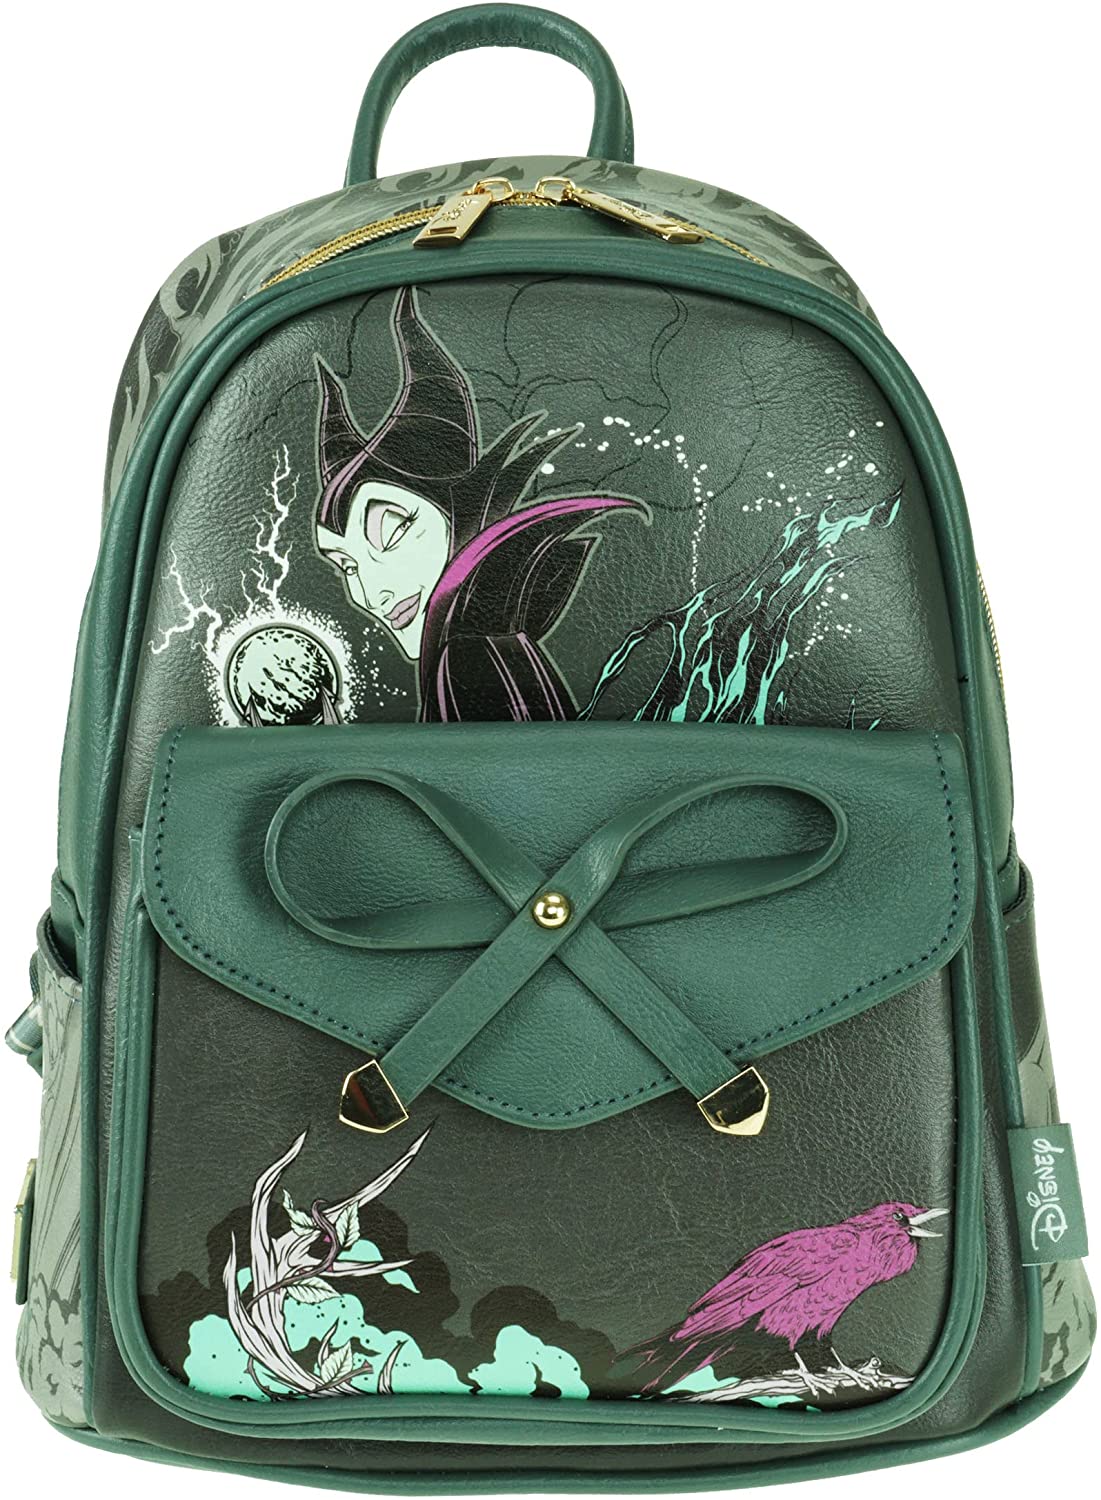 Villains - Maleficent 11" Vegan Leather Mini Backpack - A21728 - GTE Zone